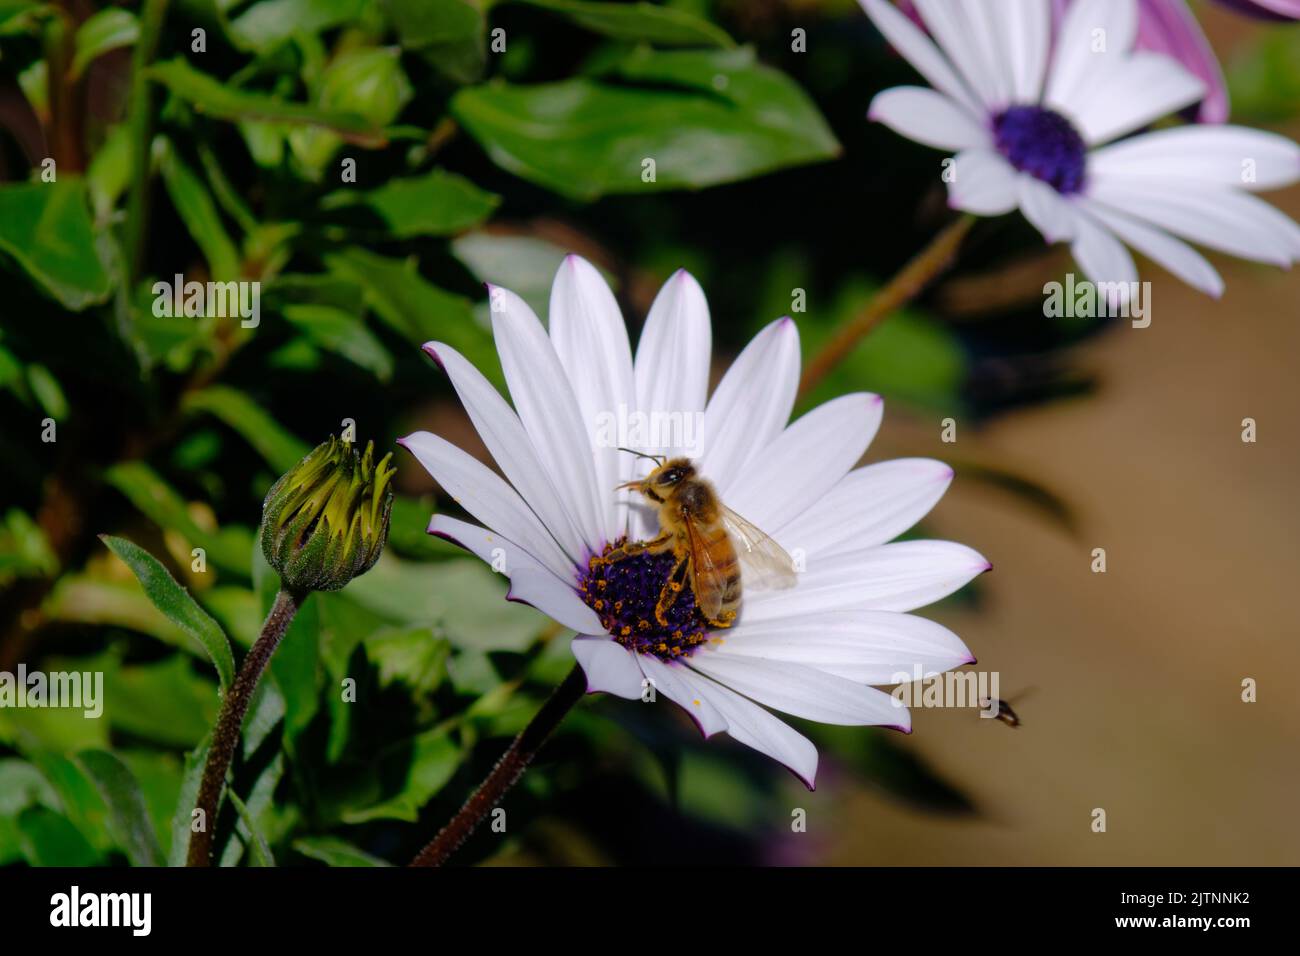 Australian Native Singless Bee (meliponini) collecting some pollen from an white daisy flower in a garden Stock Photo